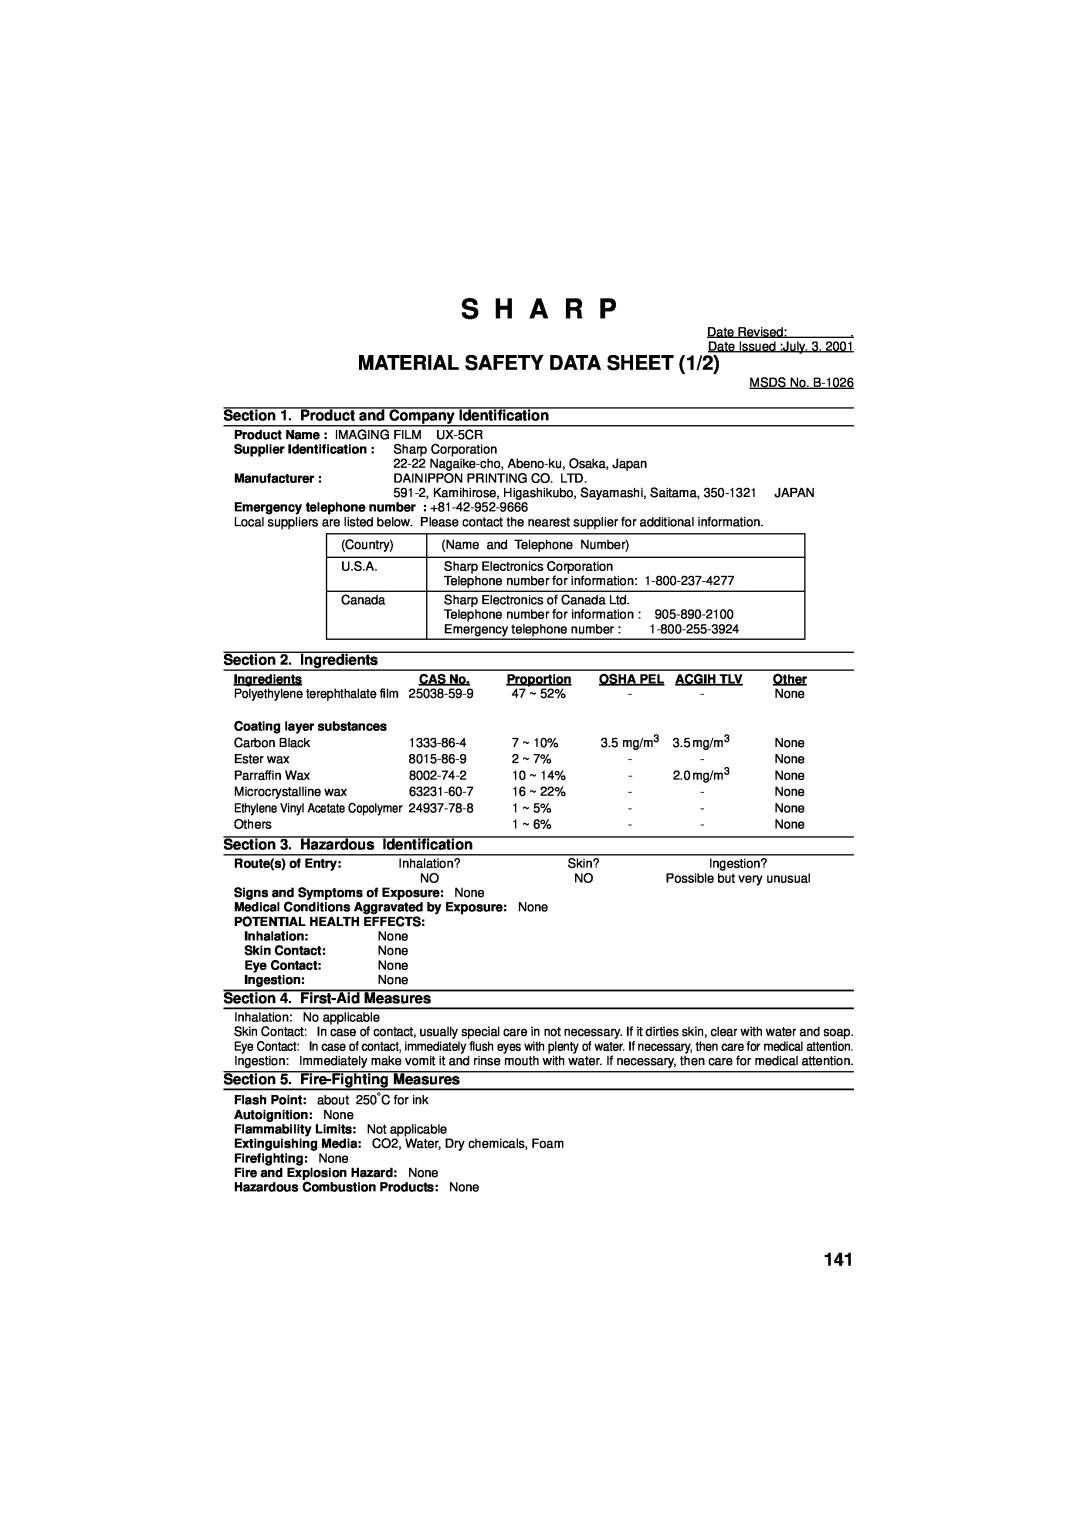 Sharp UX-CD600 operation manual S H A R P, MATERIAL SAFETY DATA SHEET 1/2 